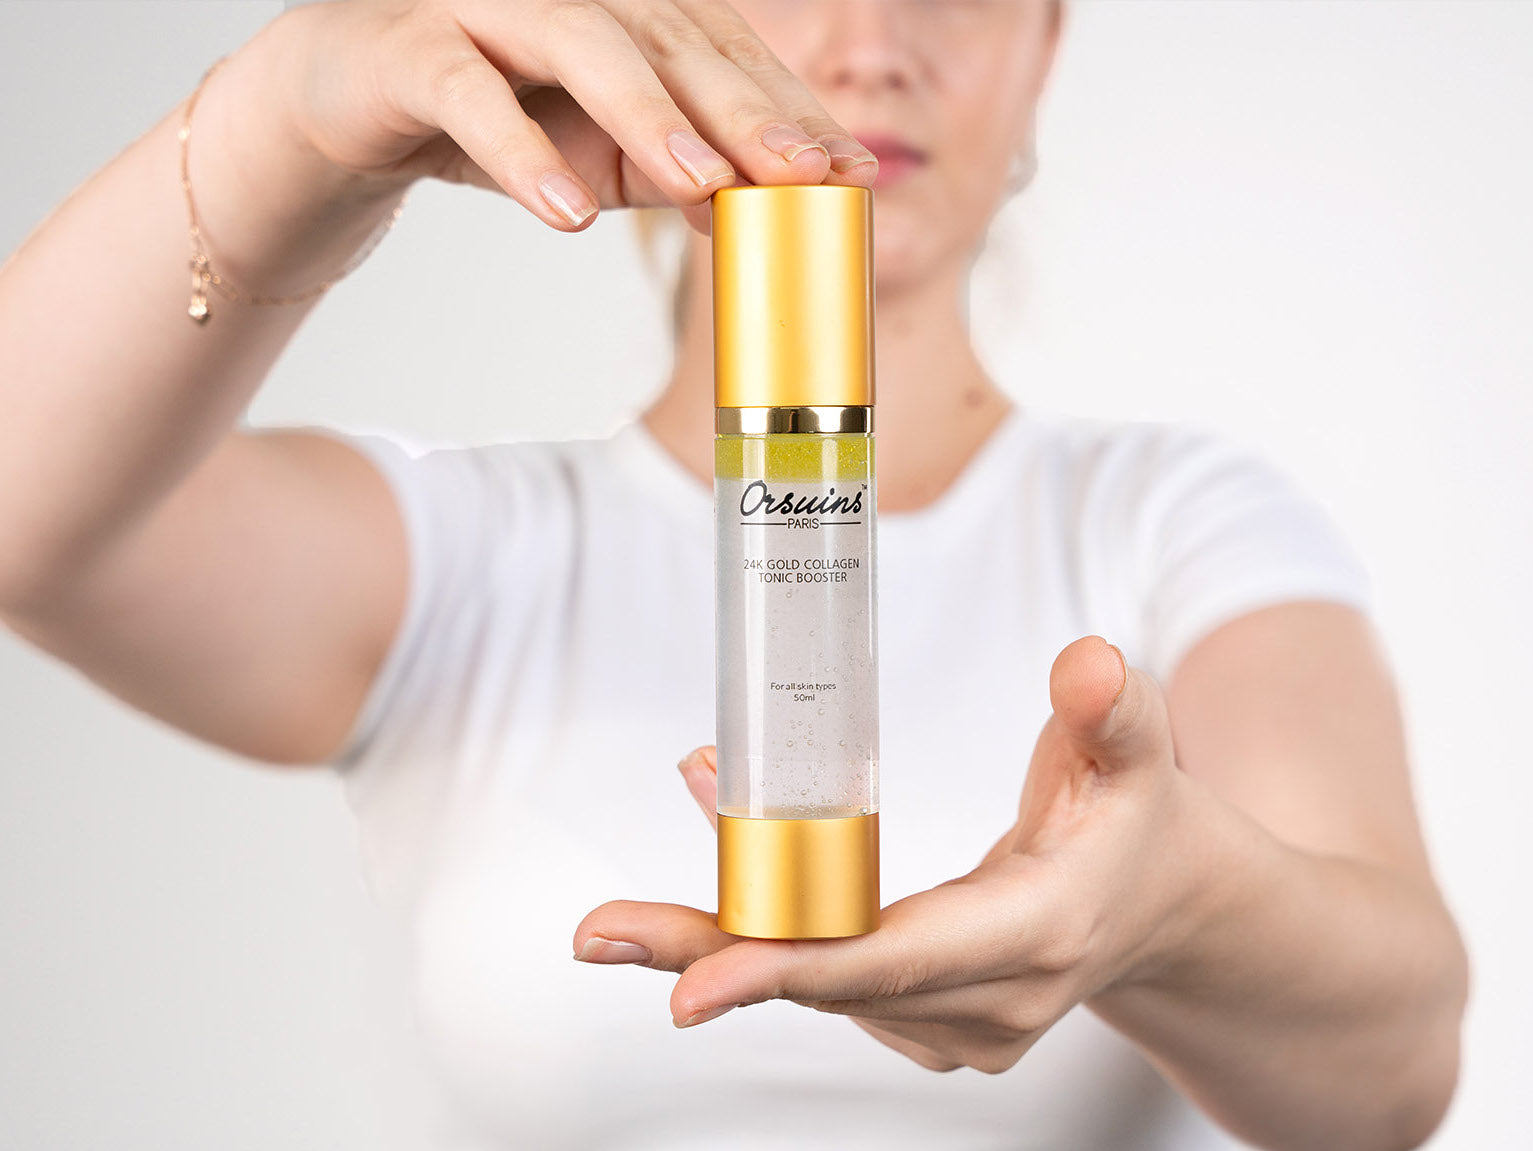 Orsuins Skin Care Model with Collagen Tonic Booster in hands